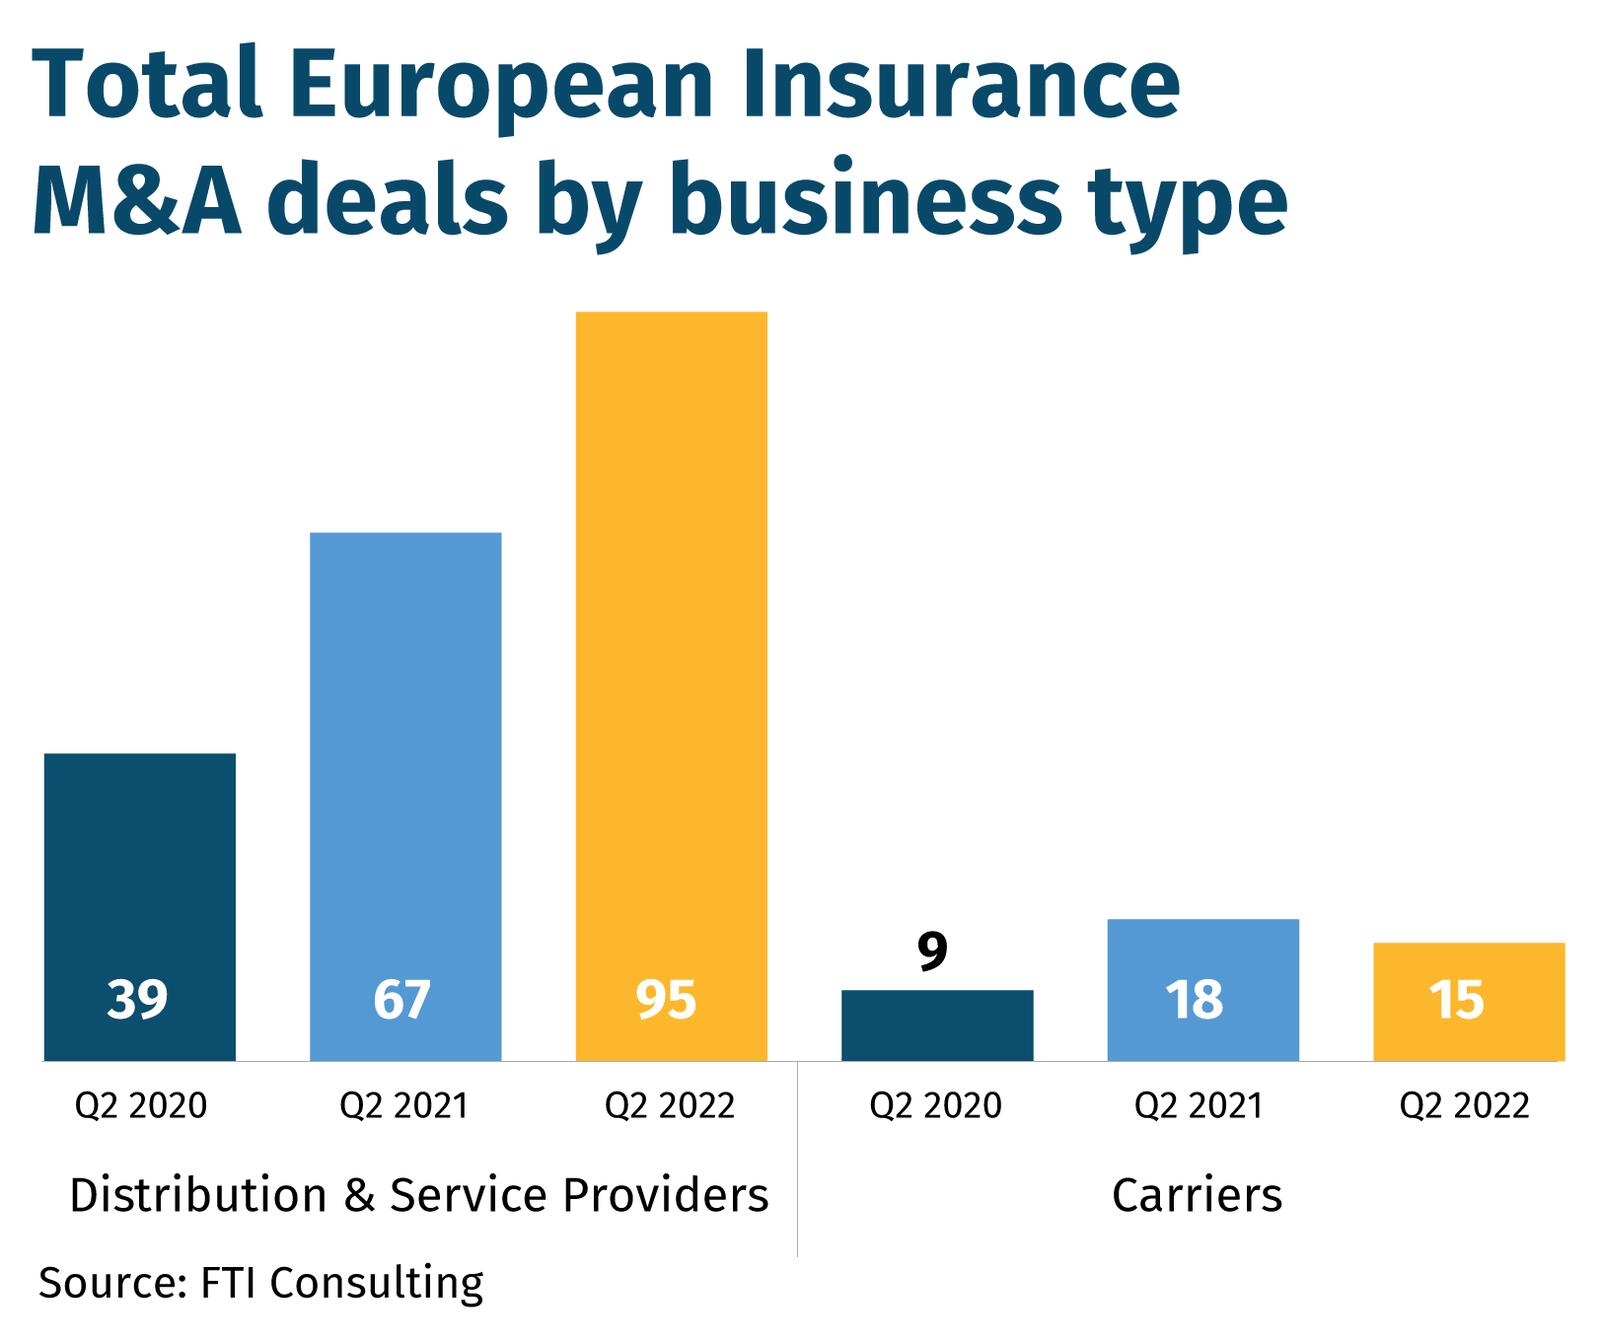 Total European Insurance M&A deals by business type